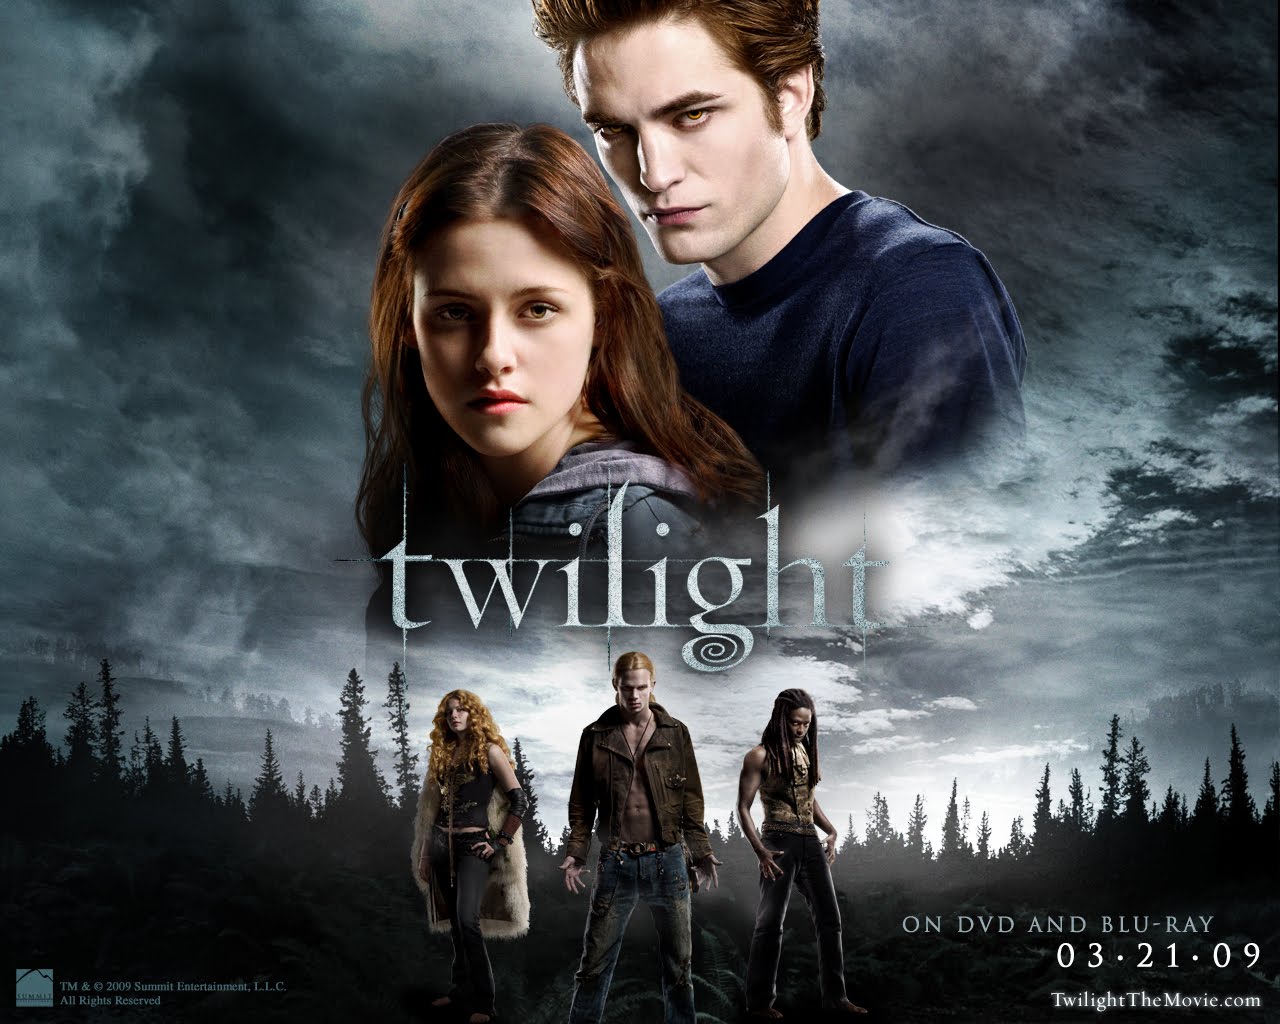 Twilight Wallpaper For iPhone Android Or Blackberry